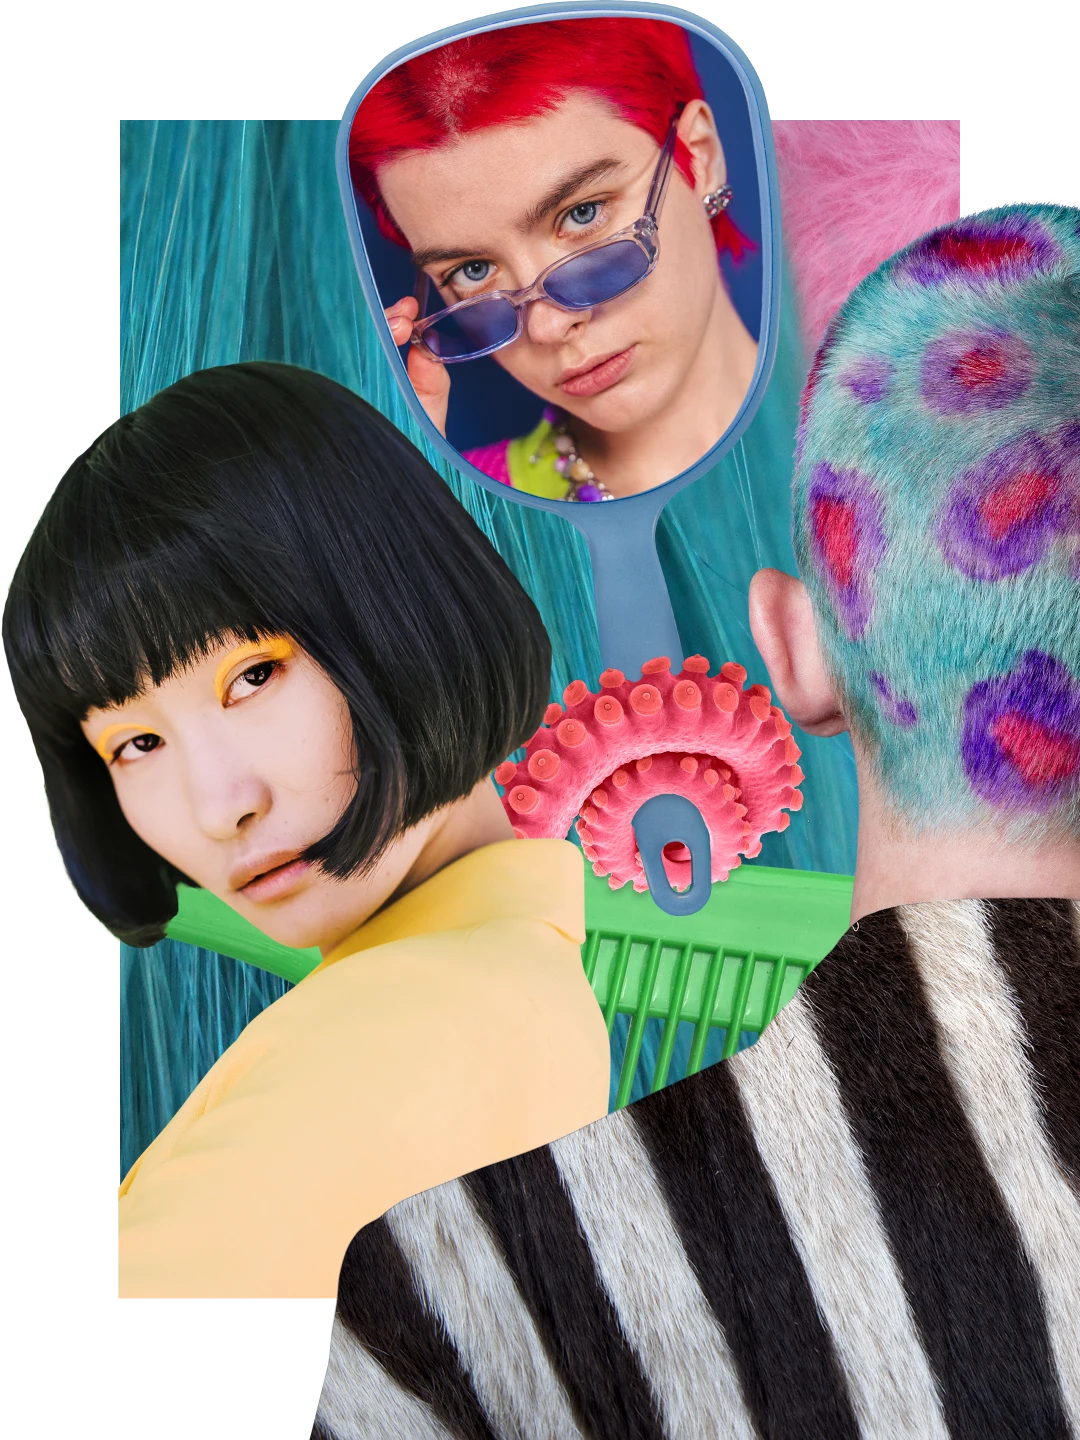 Collage of hairstyles and styling items. A hand mirror is at the back, showing the reflection of a white person with bright red hair. The back of a head dyed with a leopard-print pattern is on the right, and an East Asian woman with a bob cut is on the left. Combs and shears are in the background.
